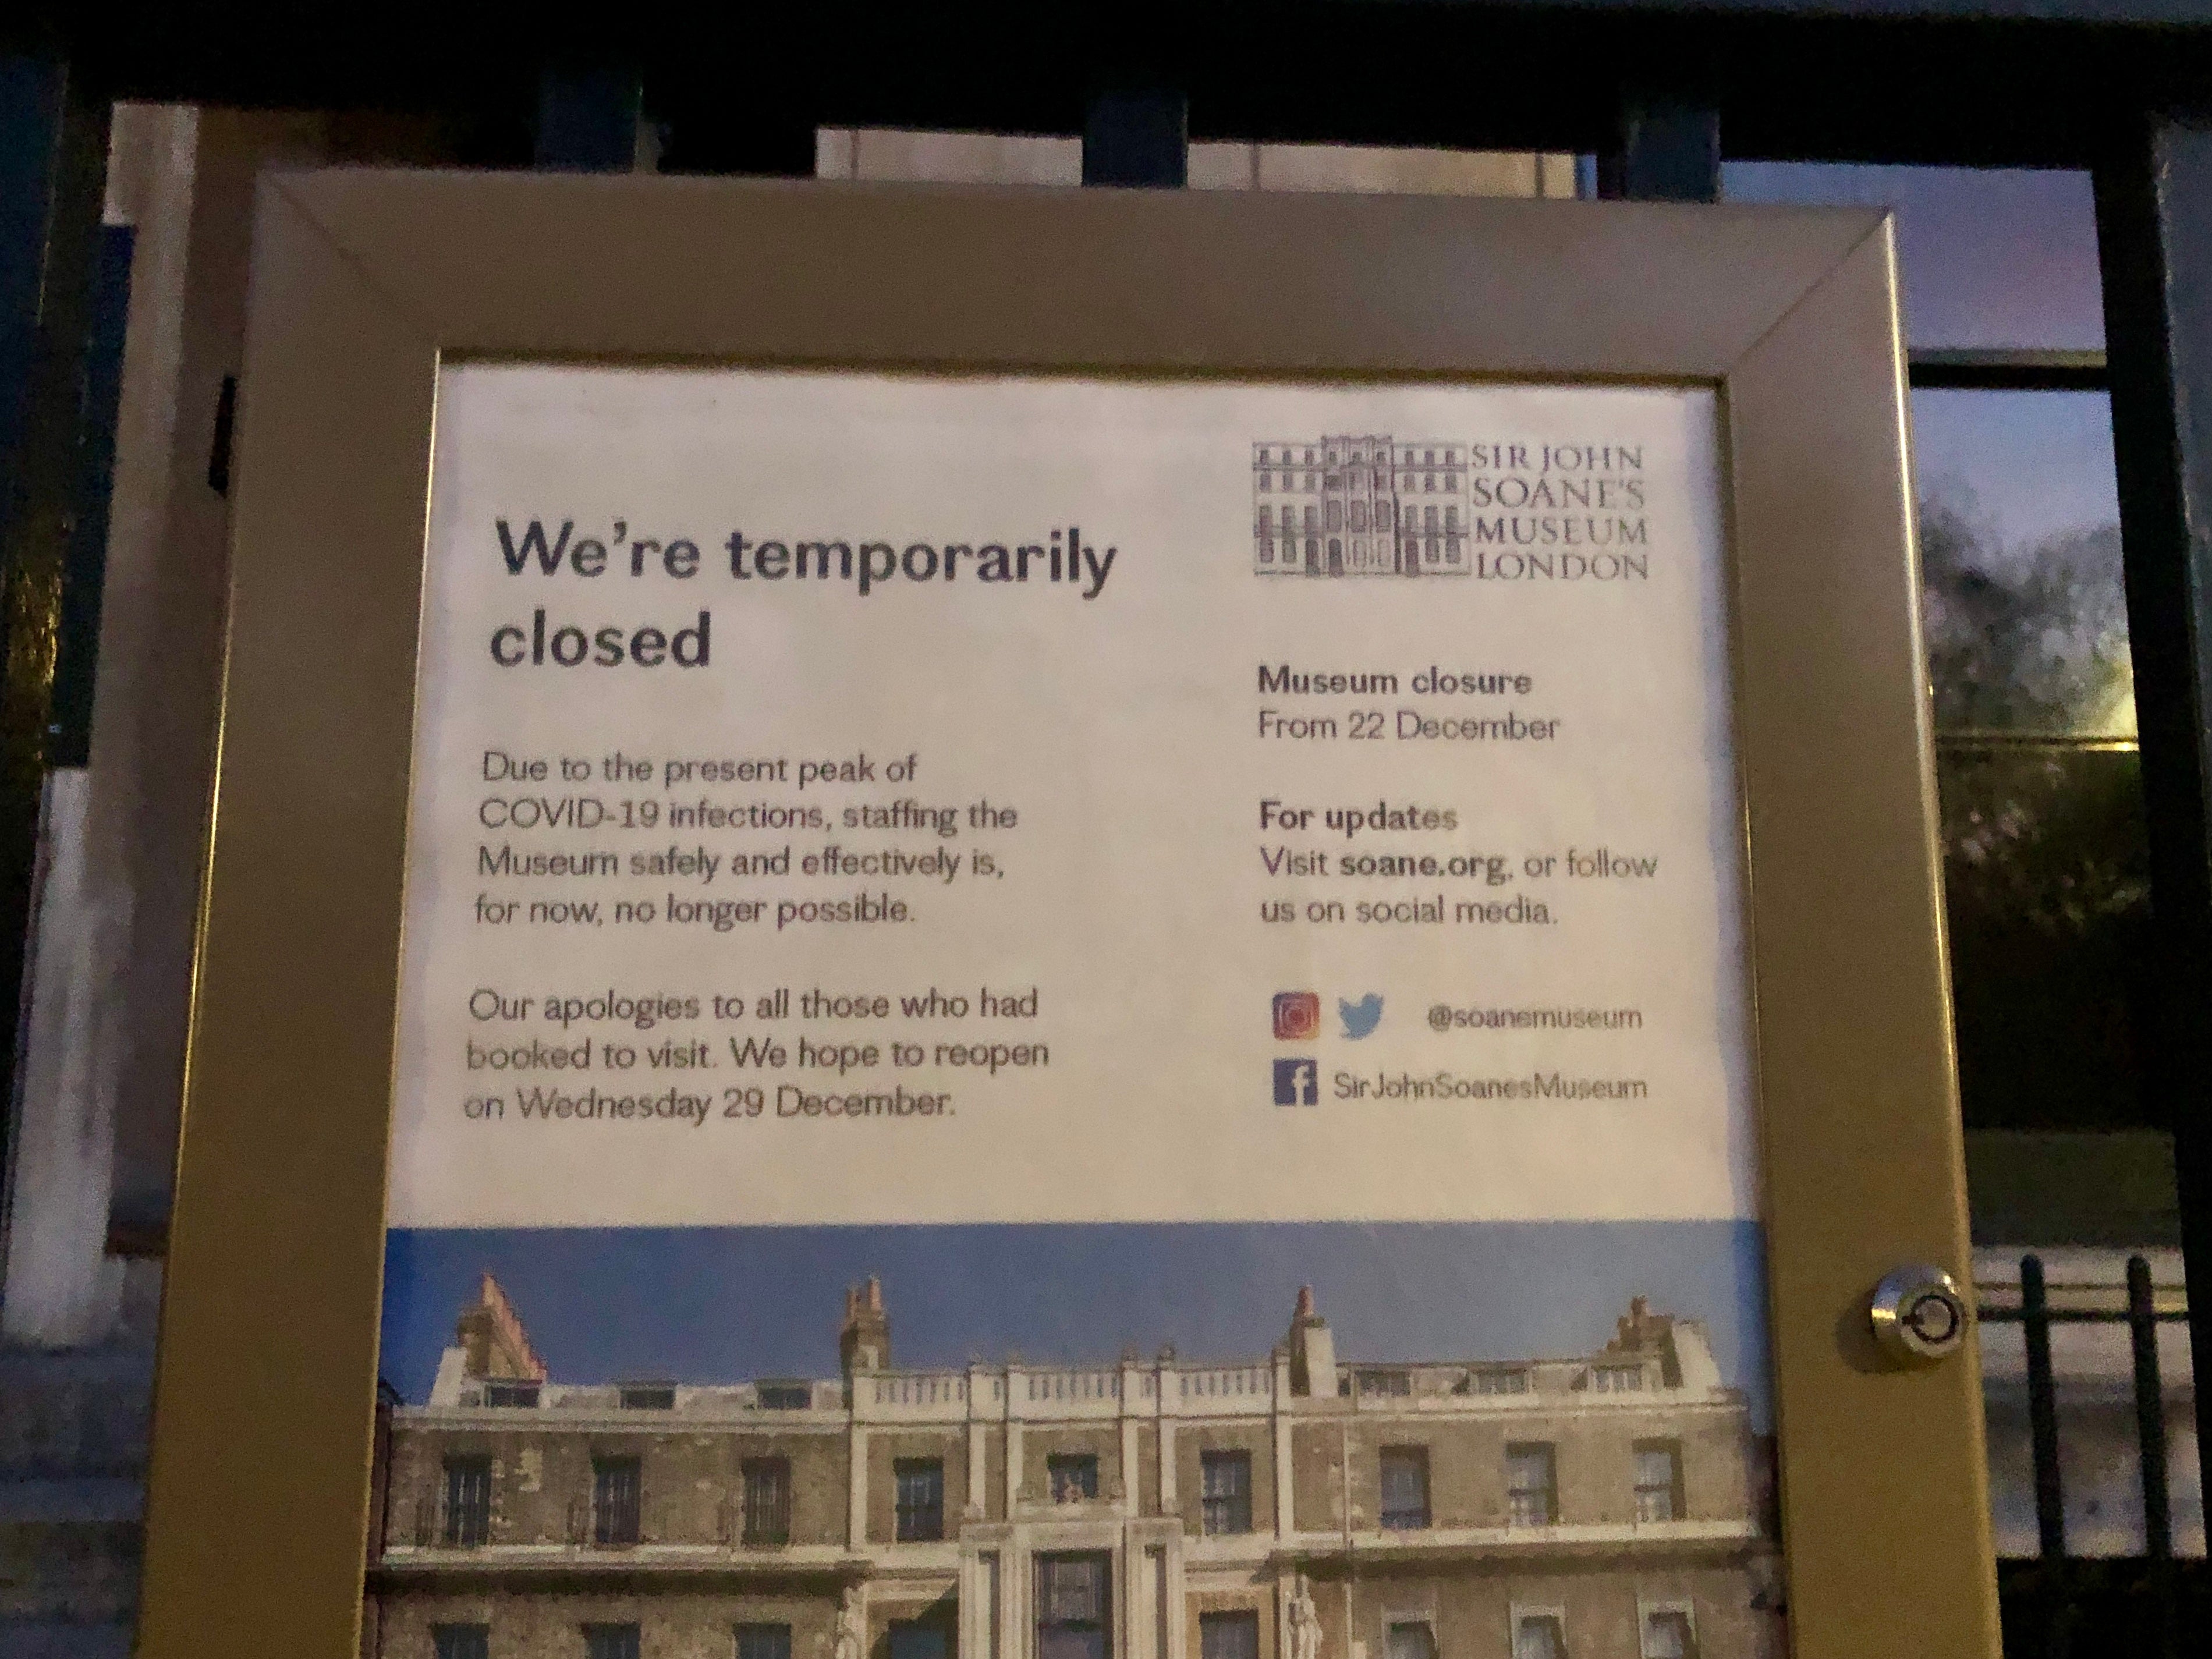 Closing down: Leading tourist attractions in London, including Sir John Soane’s Museum, are closed because of staff shortage